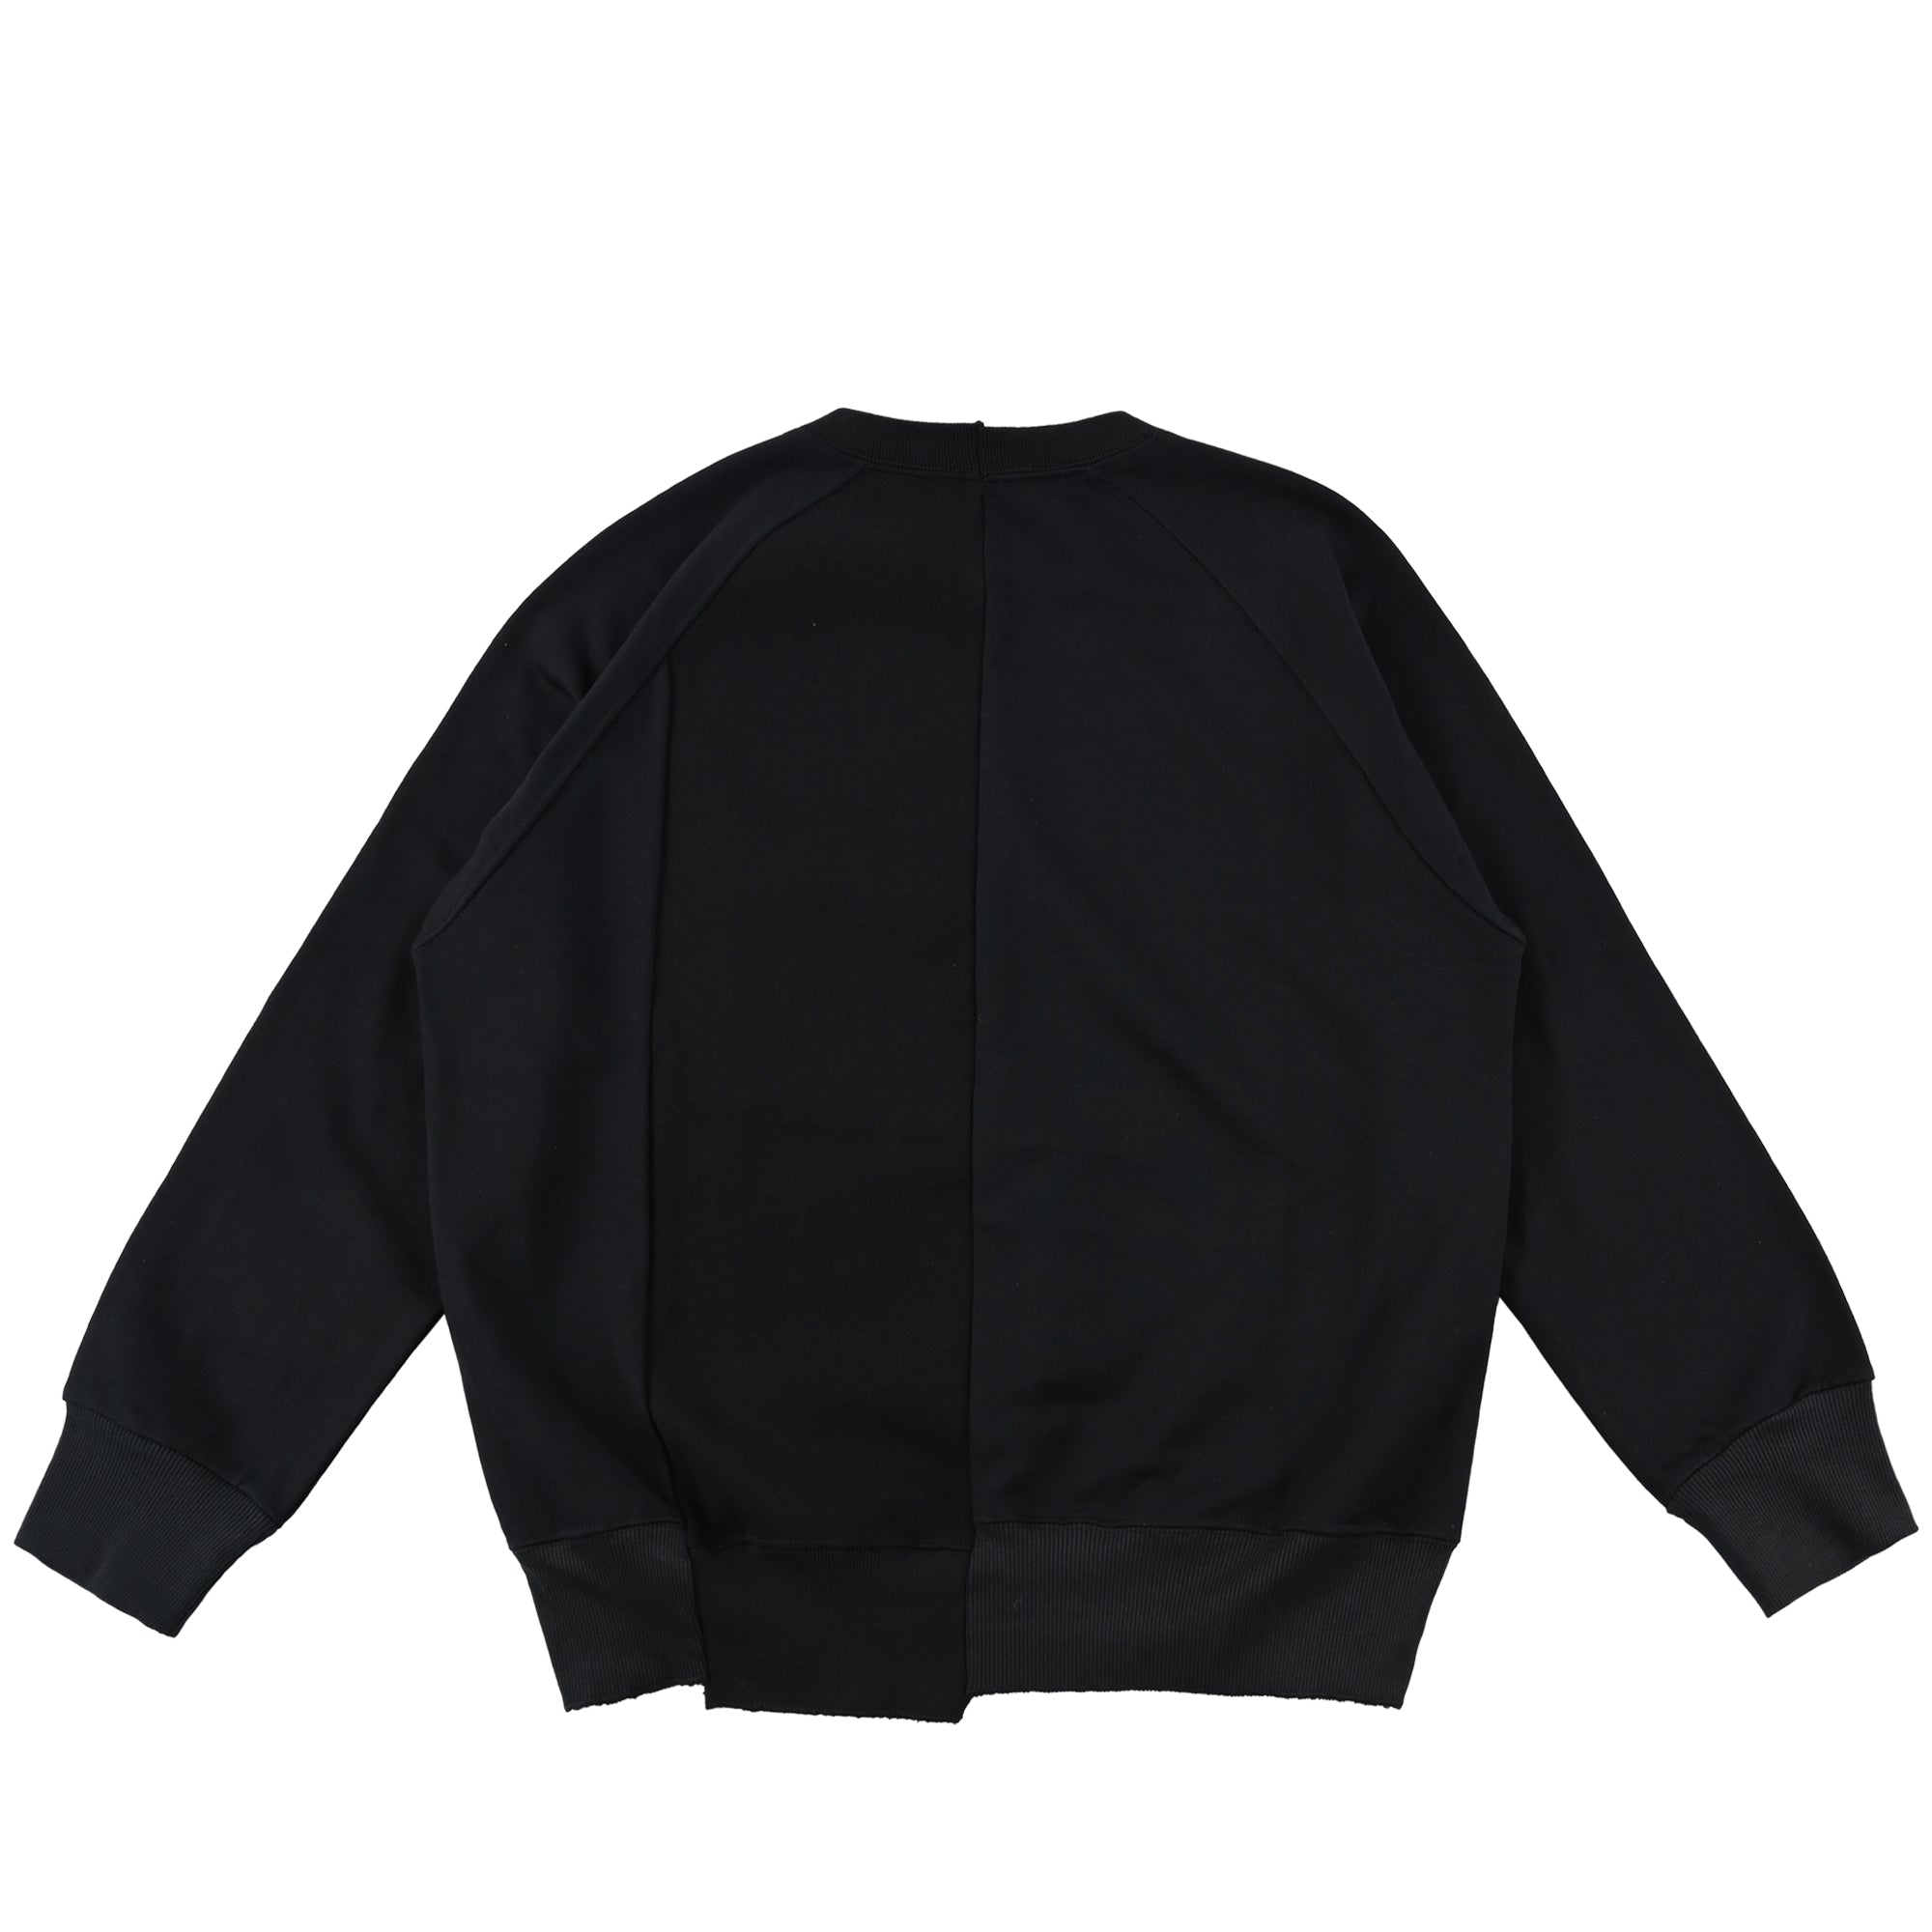 The Salvages AW22 Reconstructed Classic Crewneck Sweater in Black